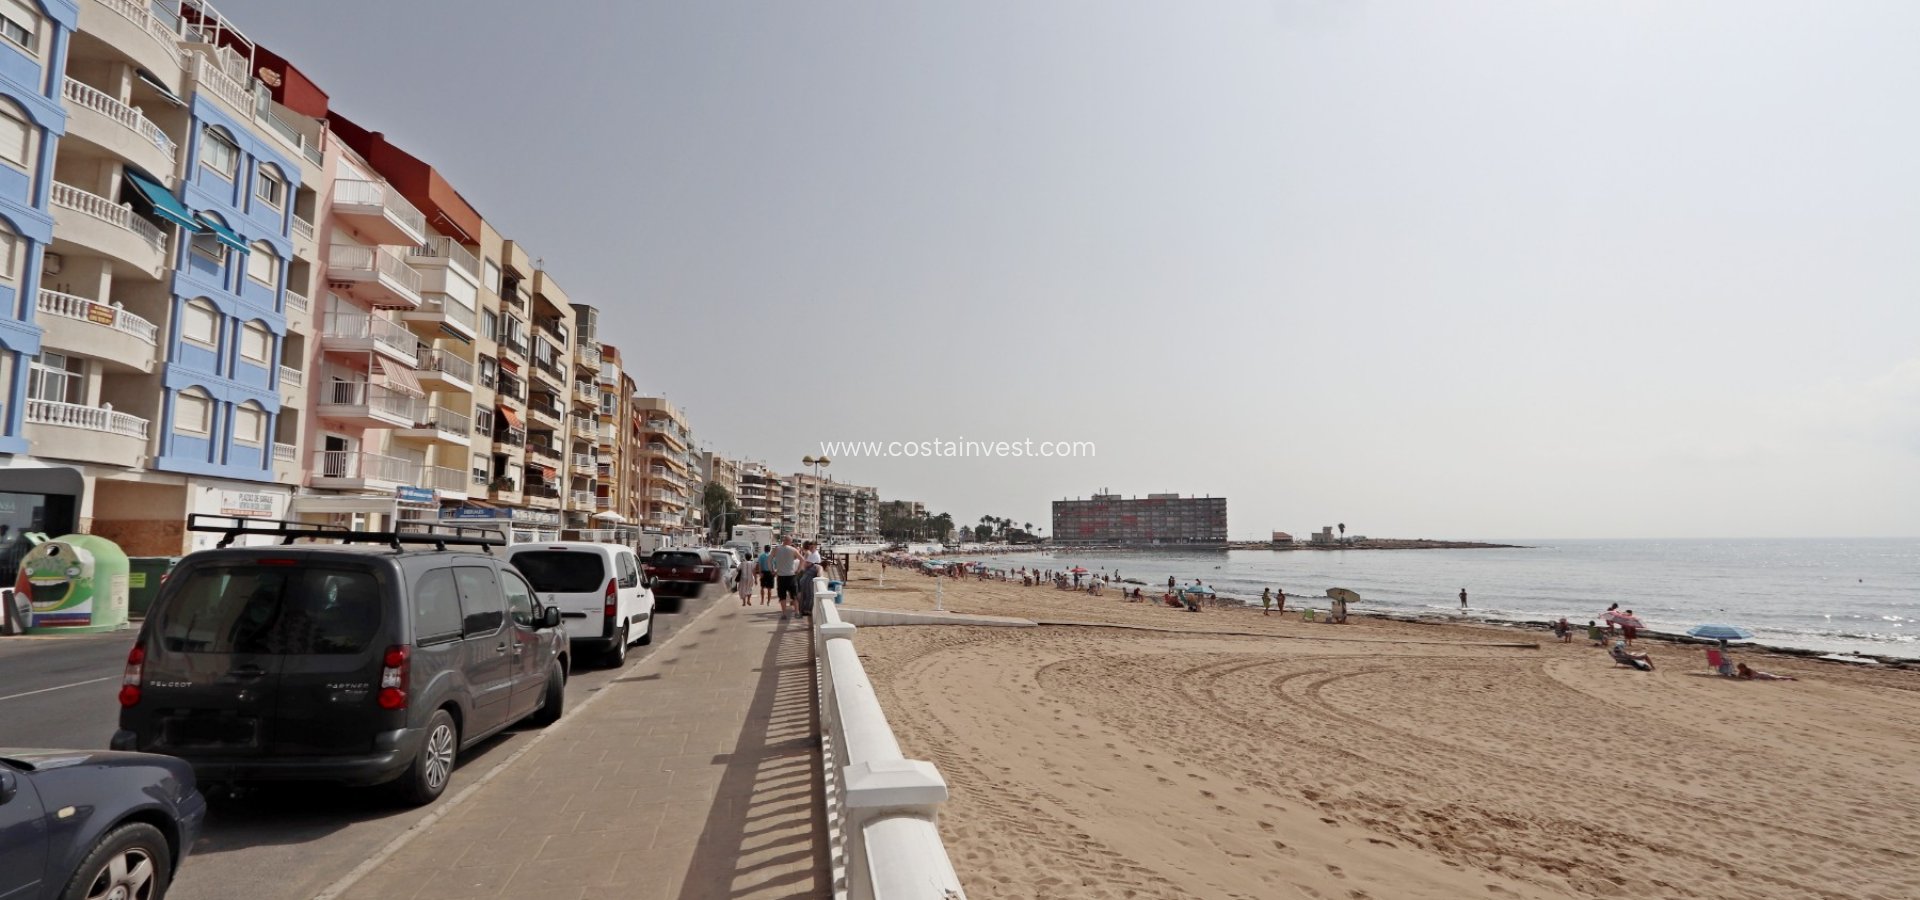 Apartment For Sale in Torrevieja -  Los Locos beach - Beach views